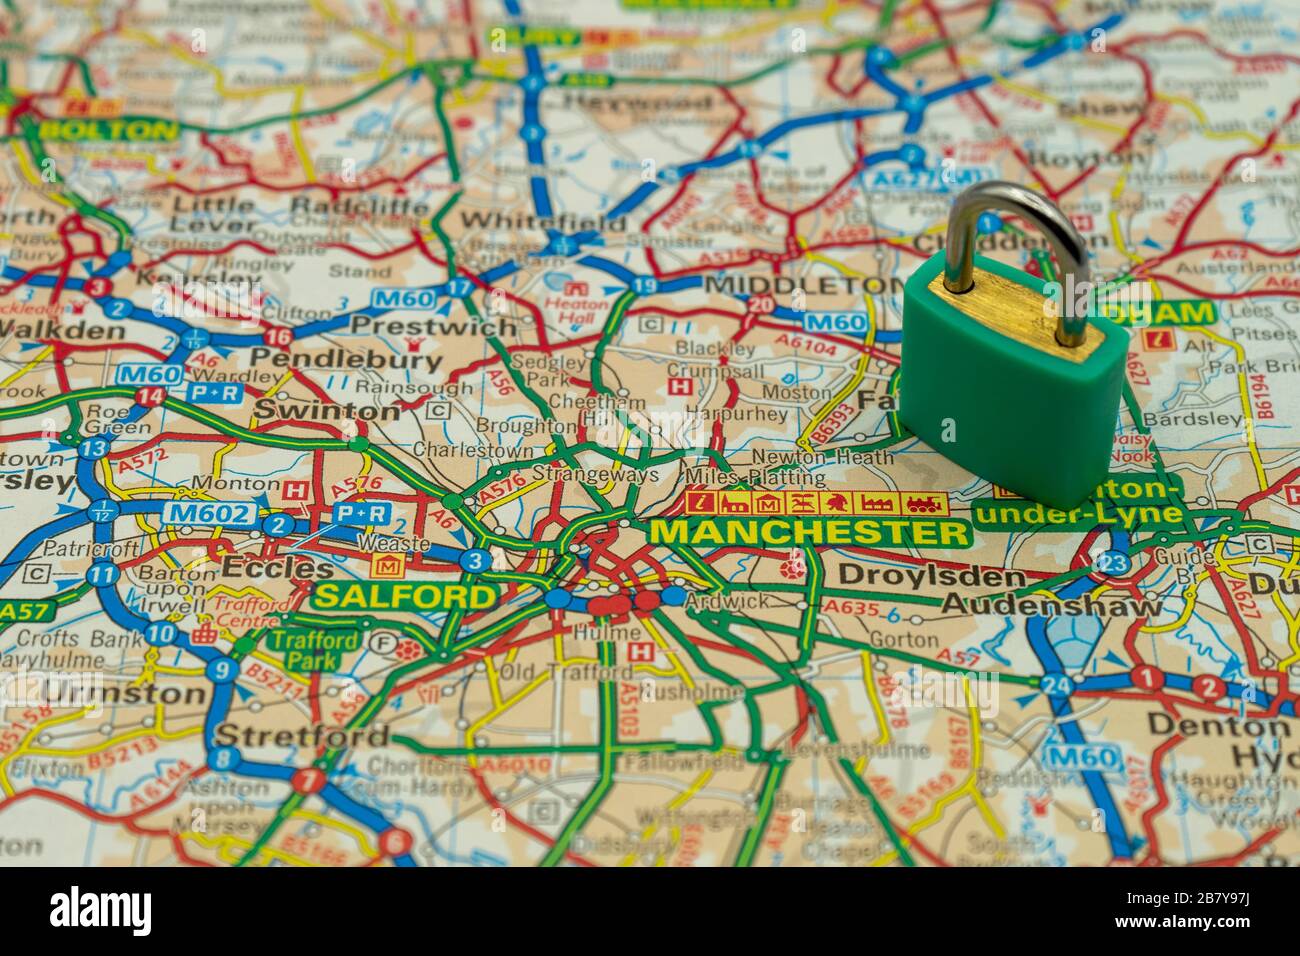 Manchester UK Shown on a road map or geography map with a padlock on top to represent a city in lock down Stock Photo